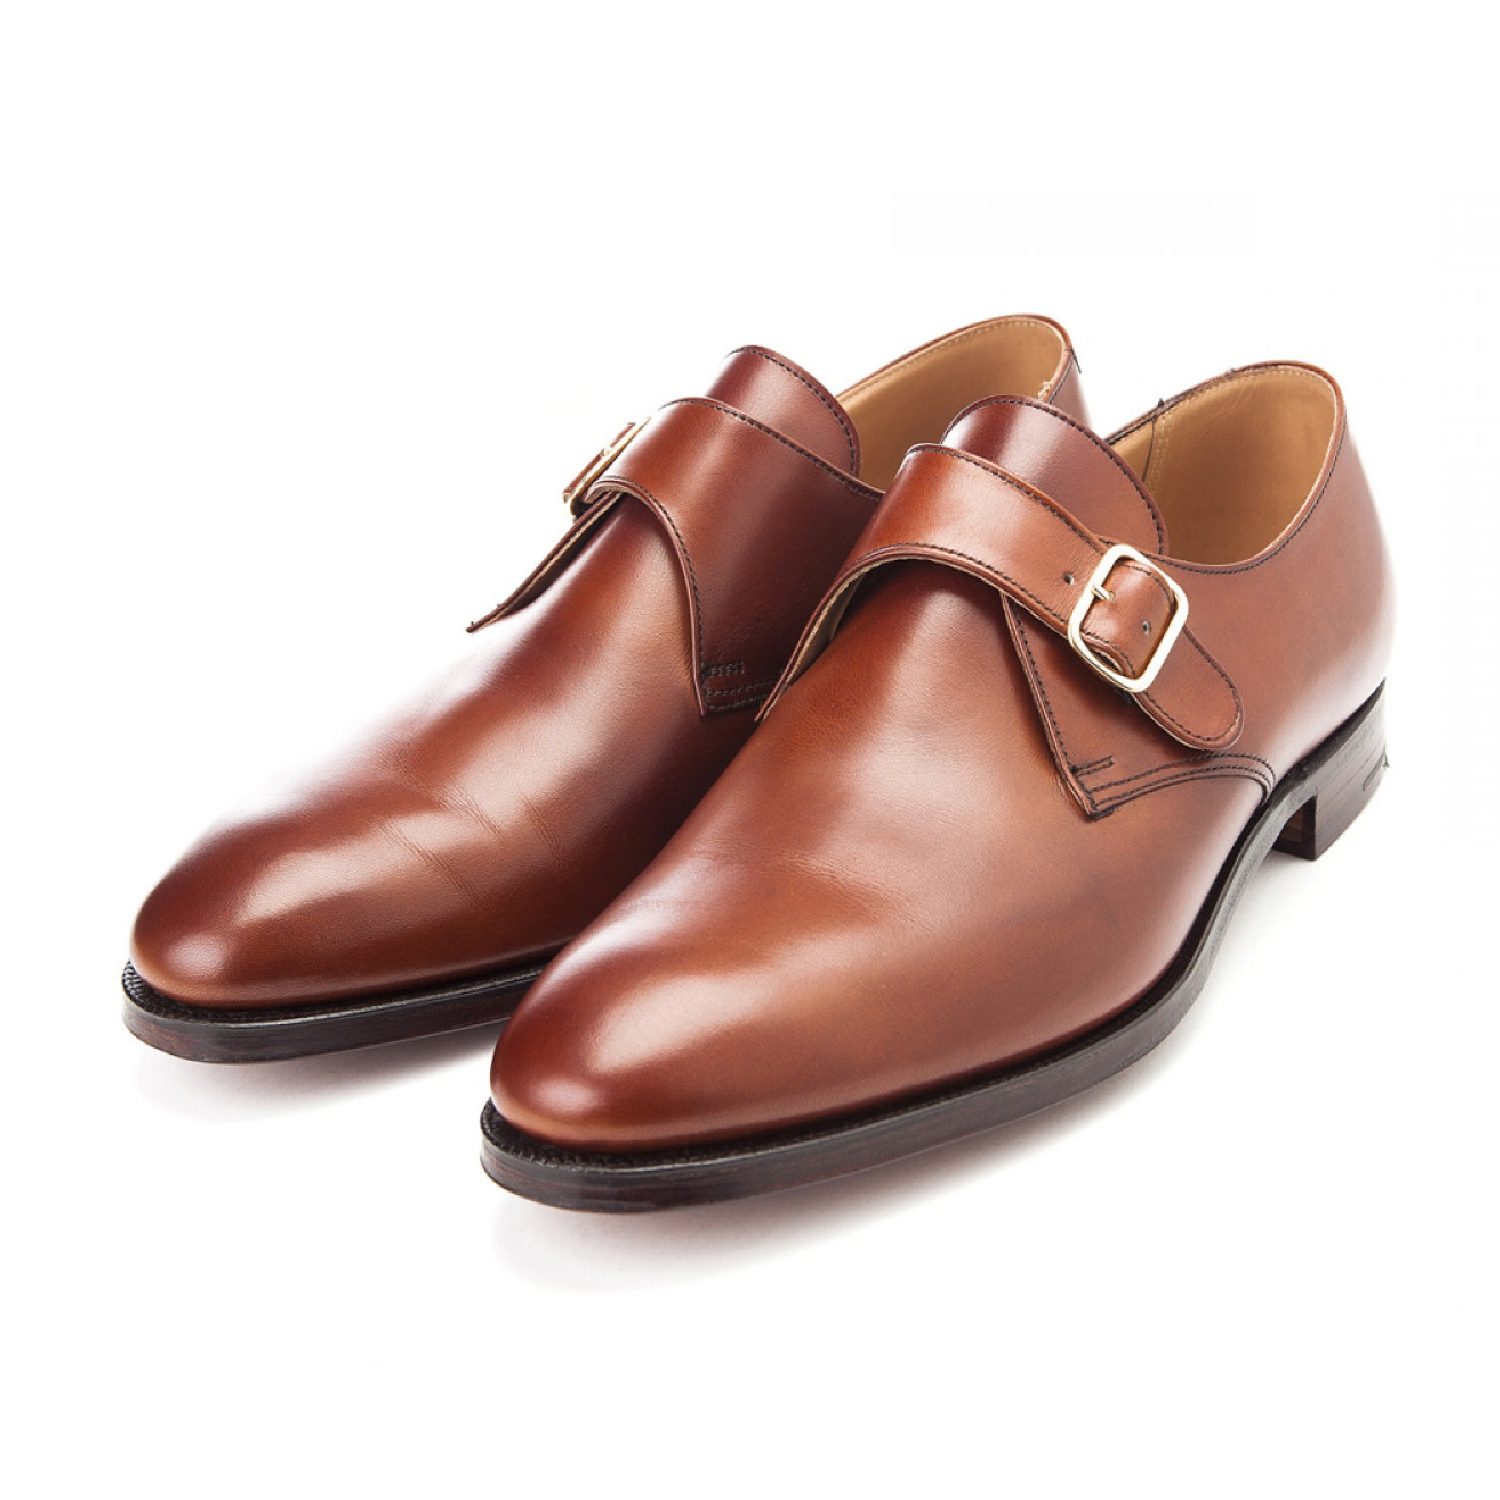 Why Single Monk Strap Shoes Are a Must-Have in Men’s Footwear Collection?